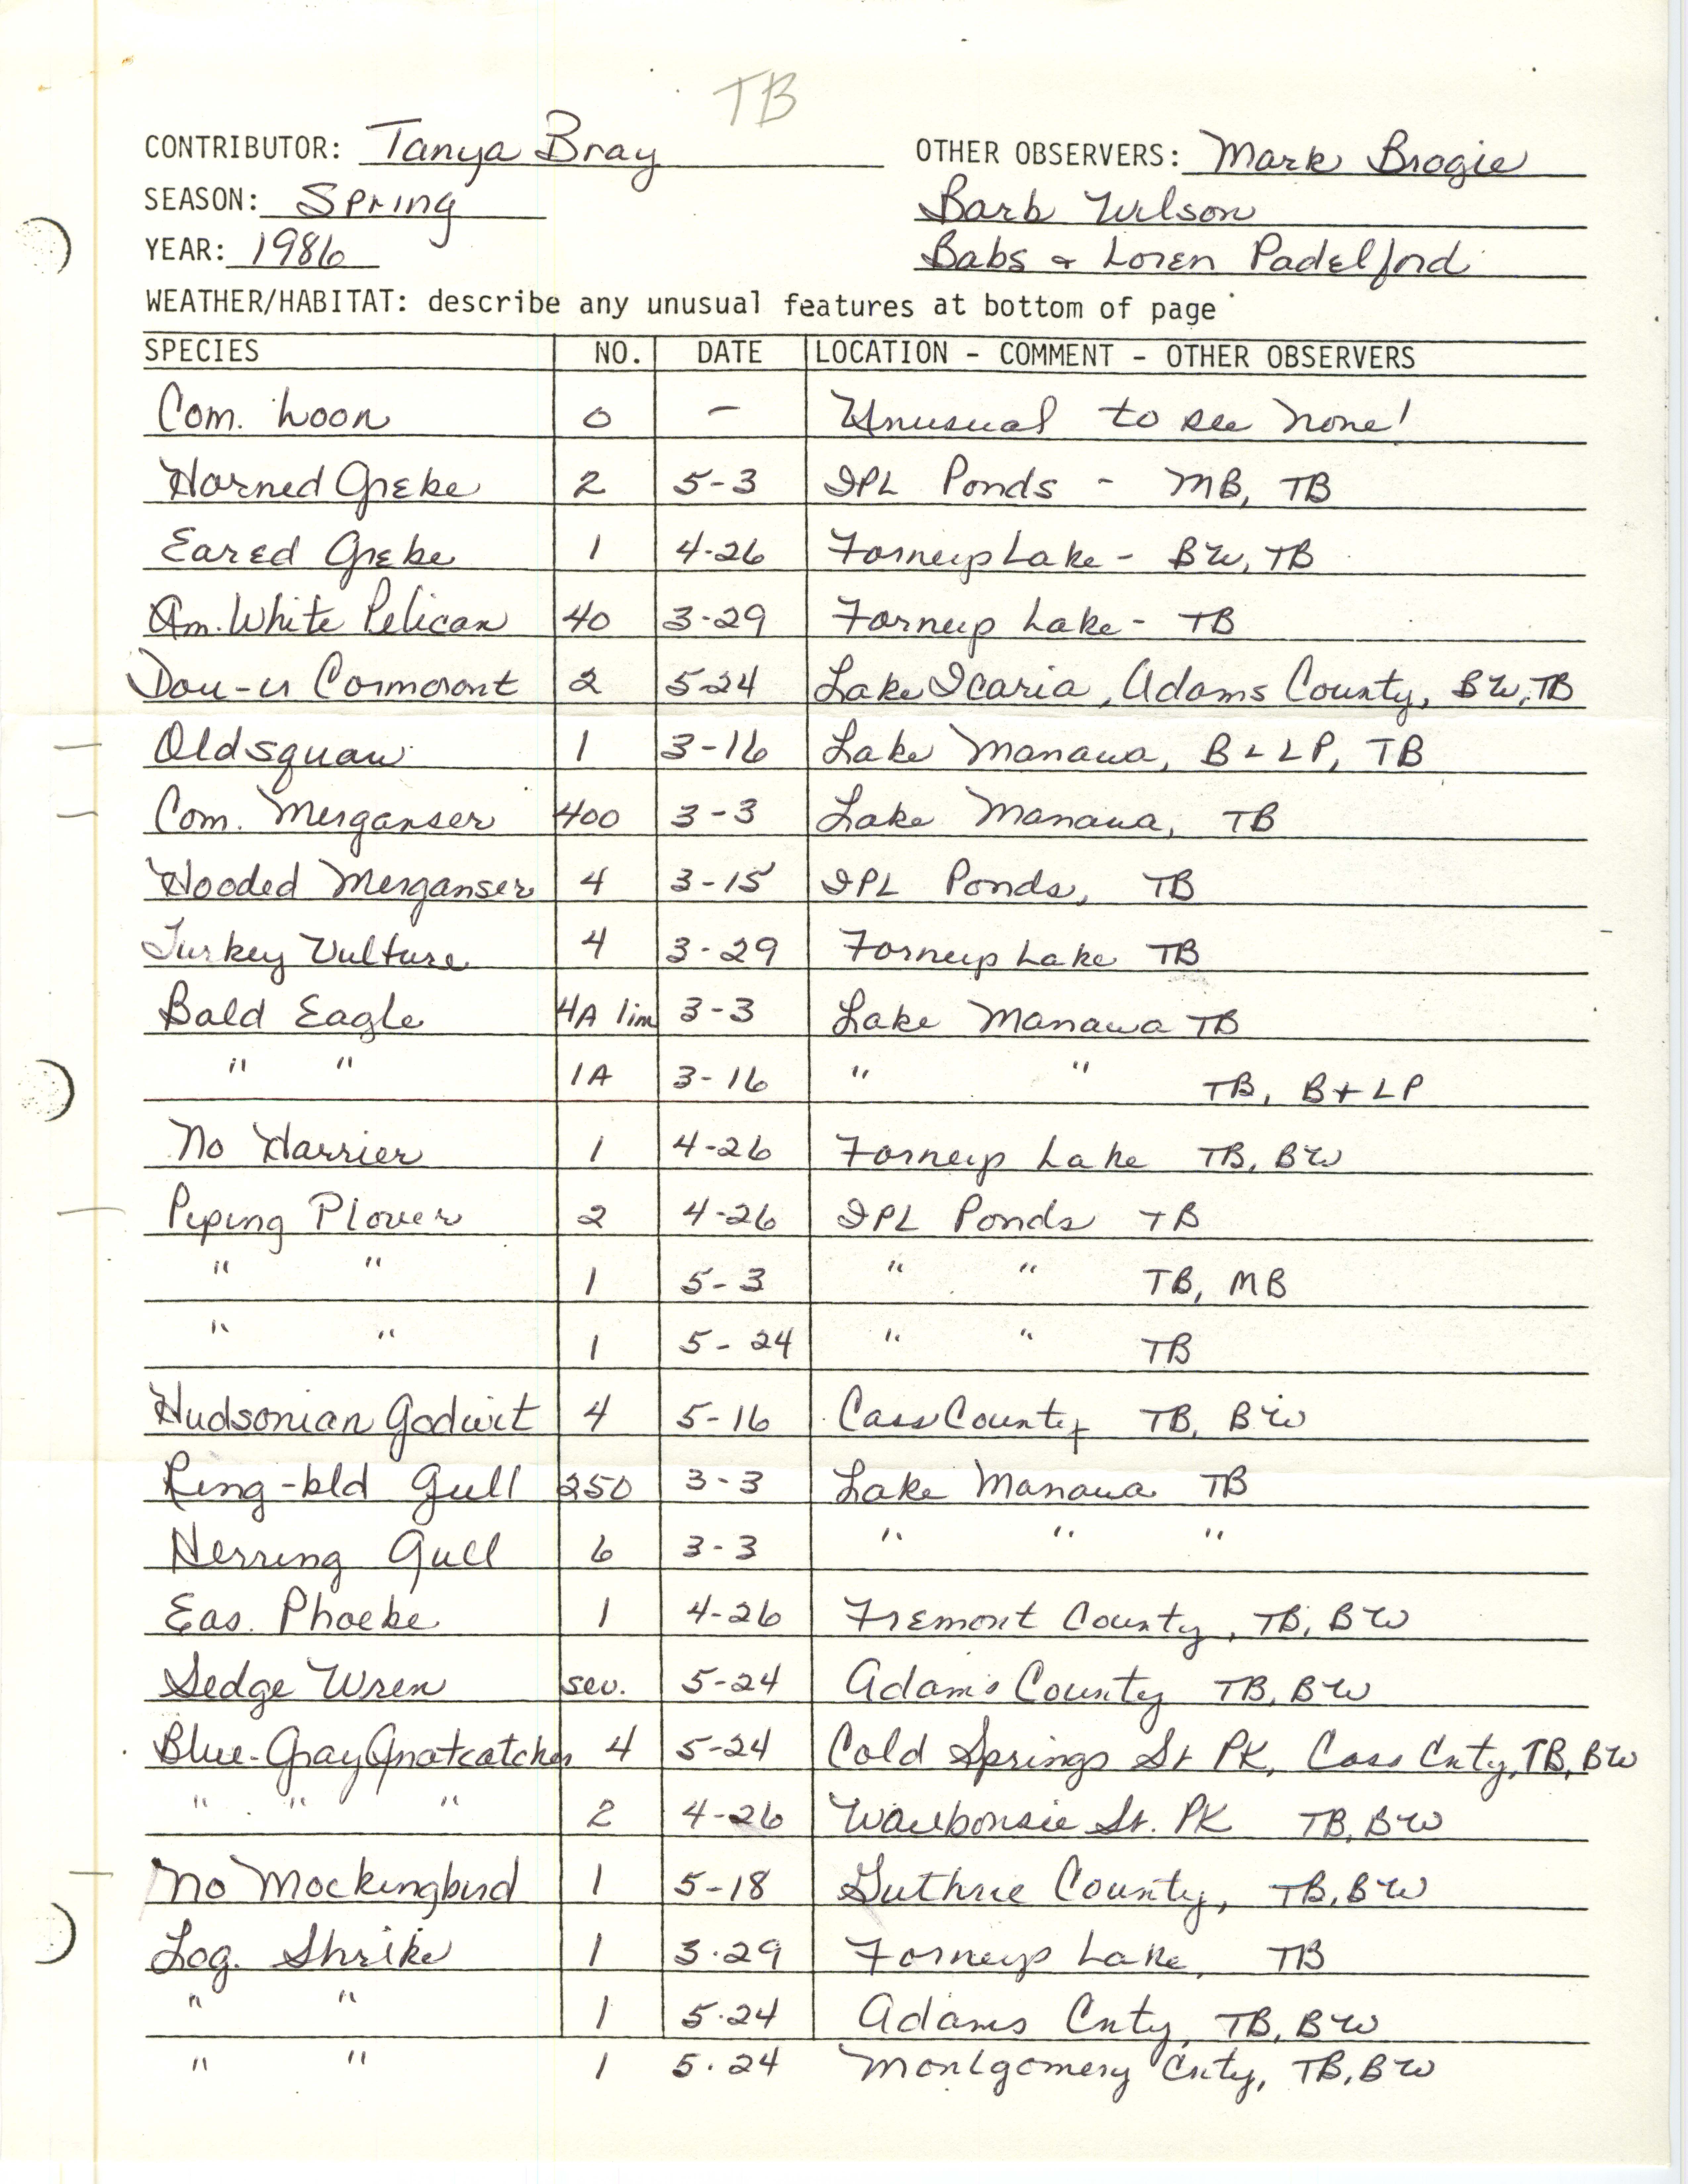 Annotated bird sighting list for Spring 1986 compiled by Tanya Bray